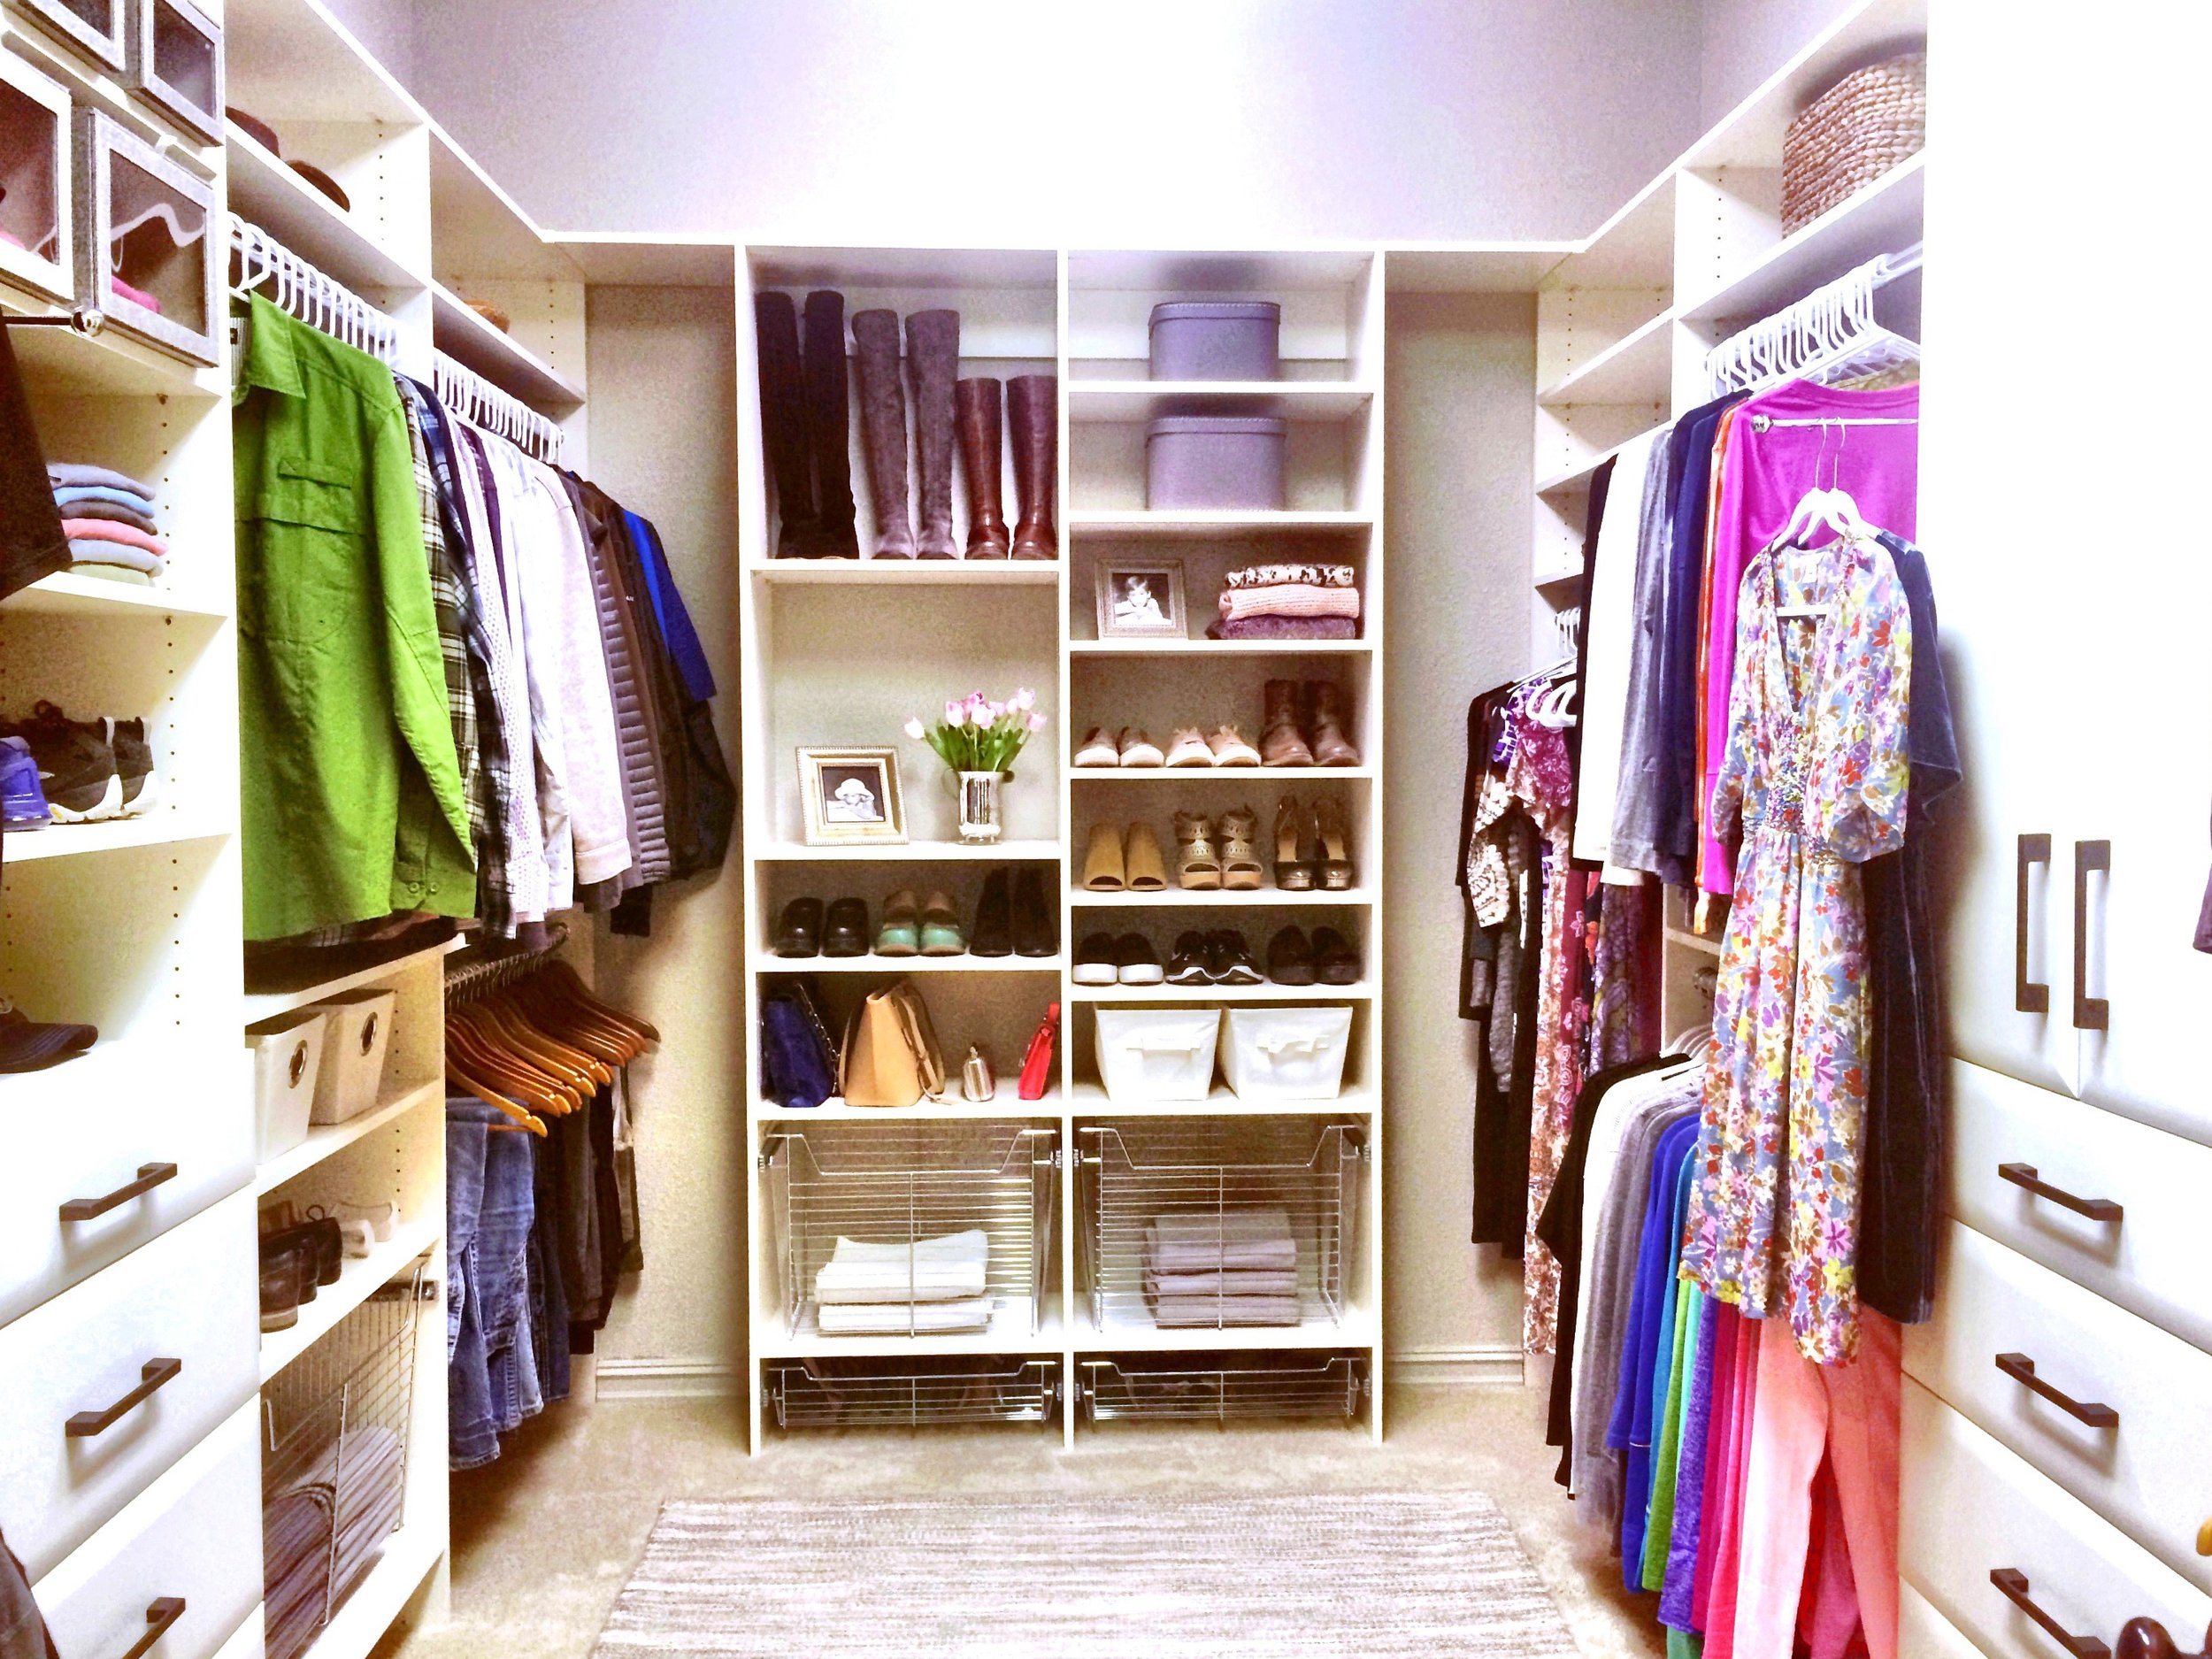 3 Great Closet Design Ideas for Small Spaces